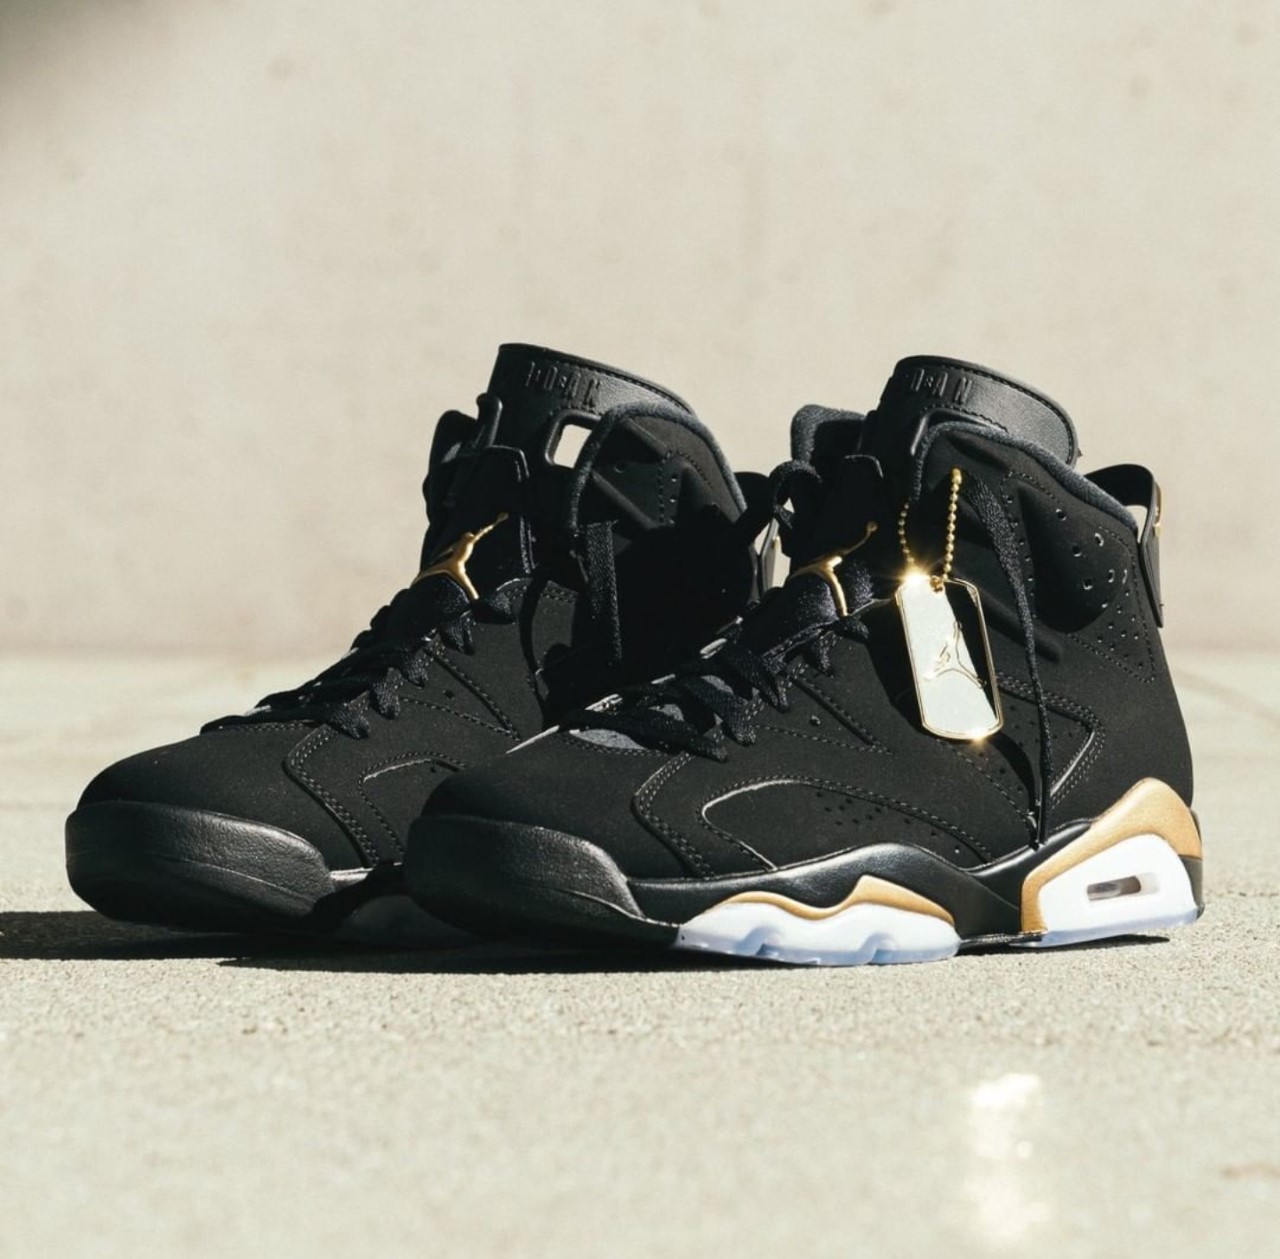 The Air Jordan 6 Dmp Releases Early In Europe Sneaker Buzz